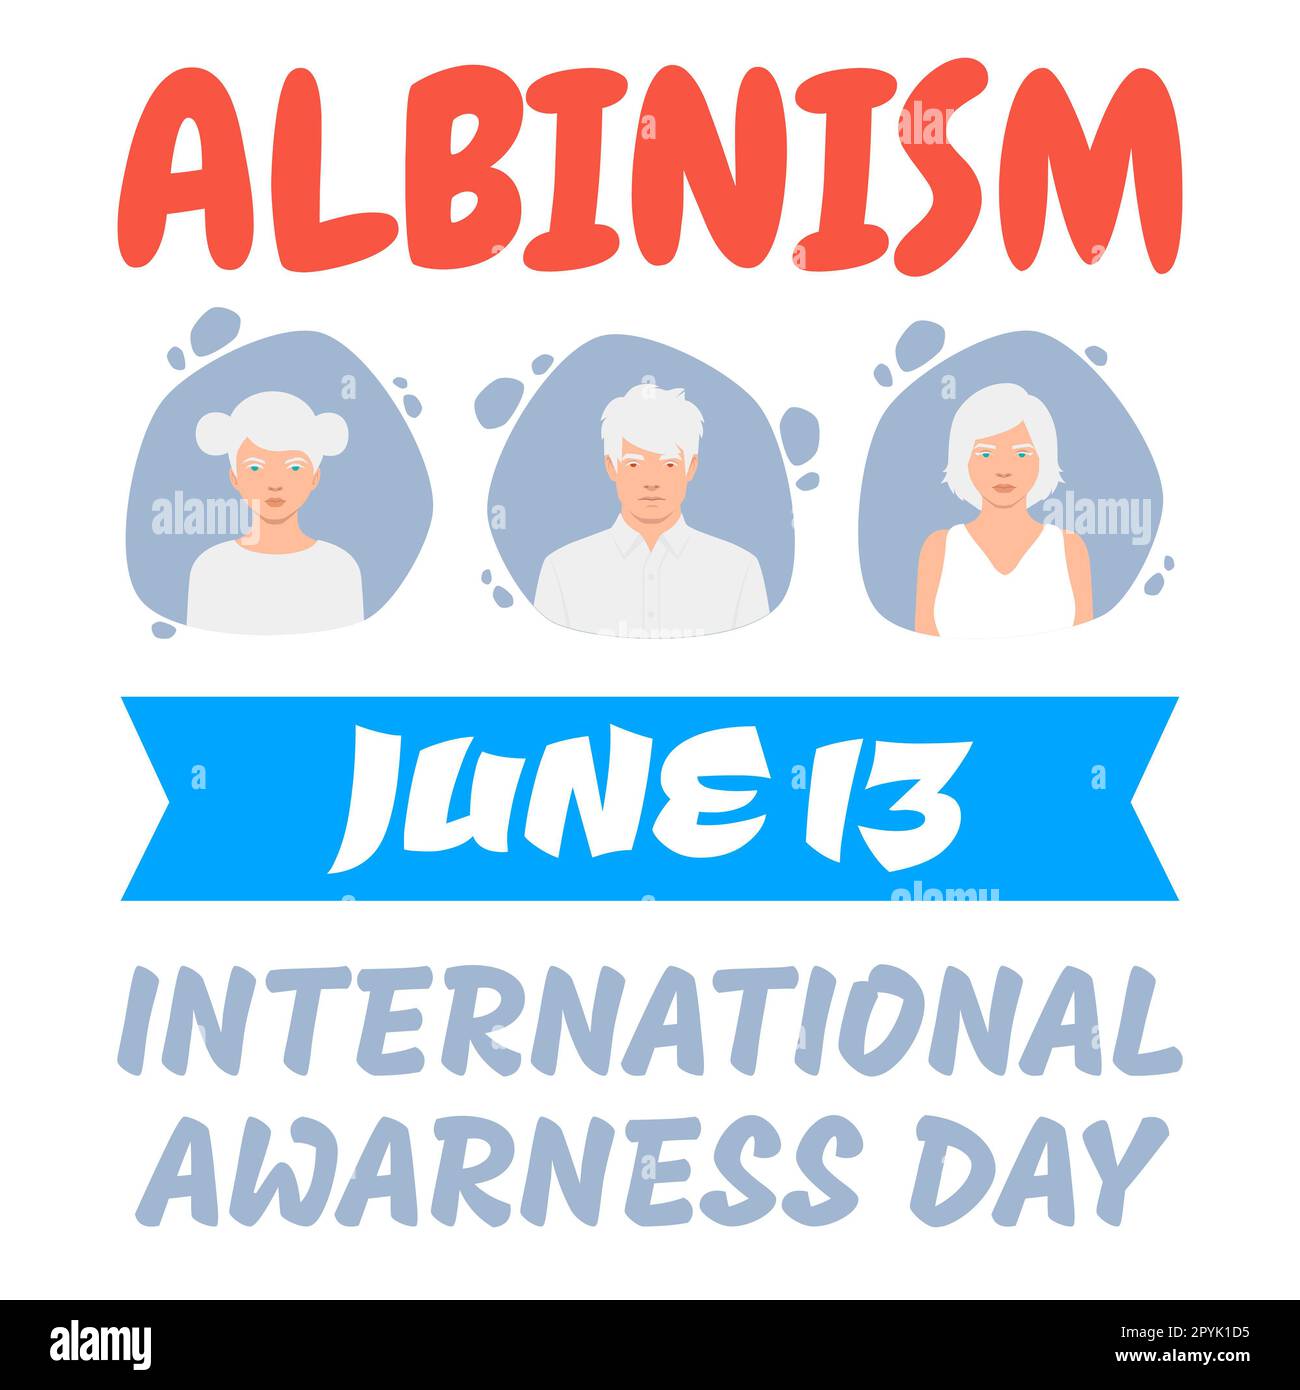 Albino people, men and women with albinism. Digital illustration of recessive inheritance where both parents carry the abnormal Albinism gene Internat Stock Photo